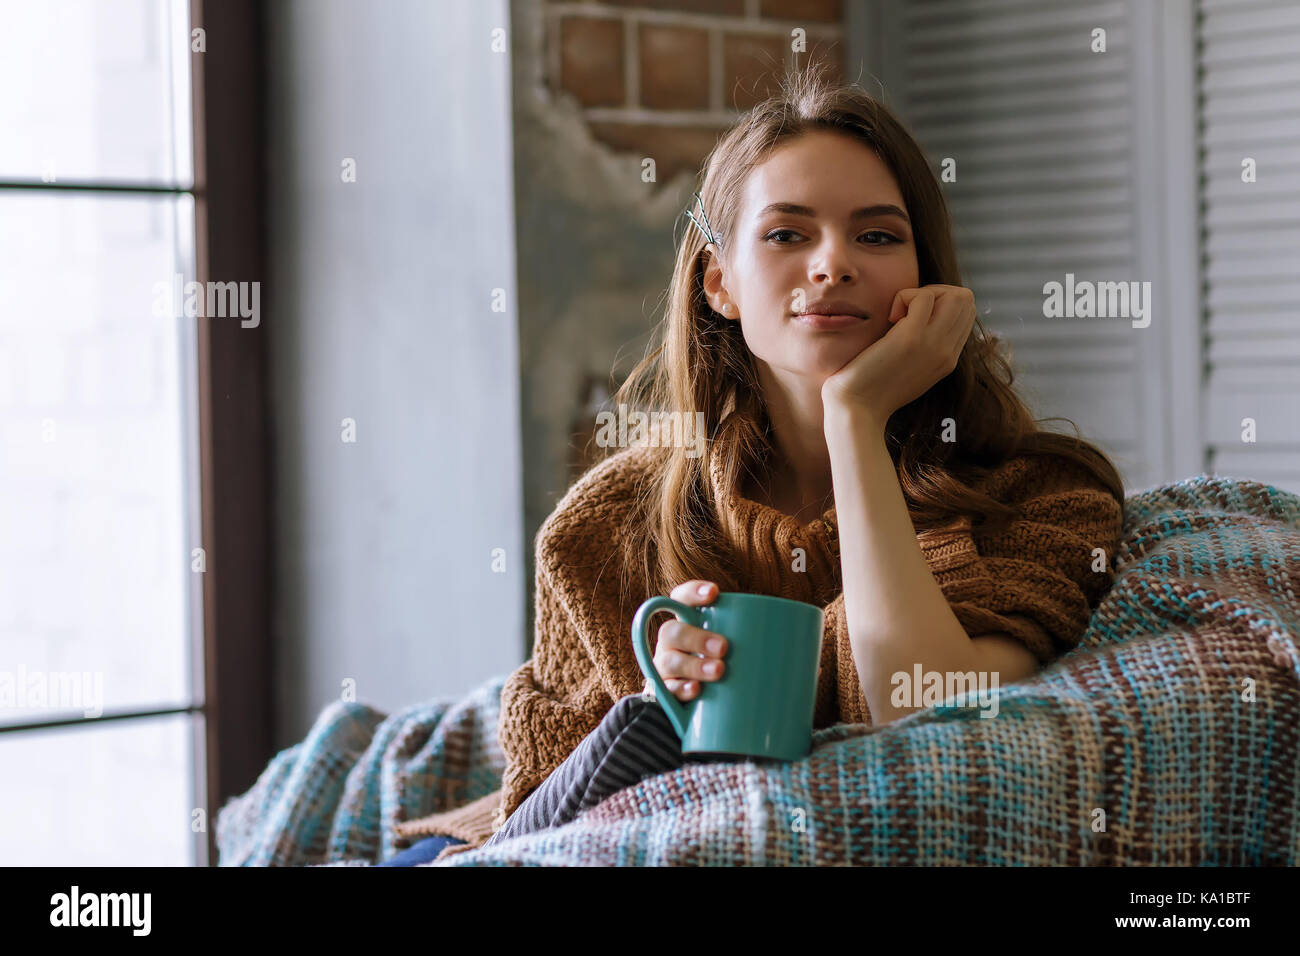 Photo in home atmosphere of young beautiful girl sitting in a chair with a mug of coffee Stock Photo